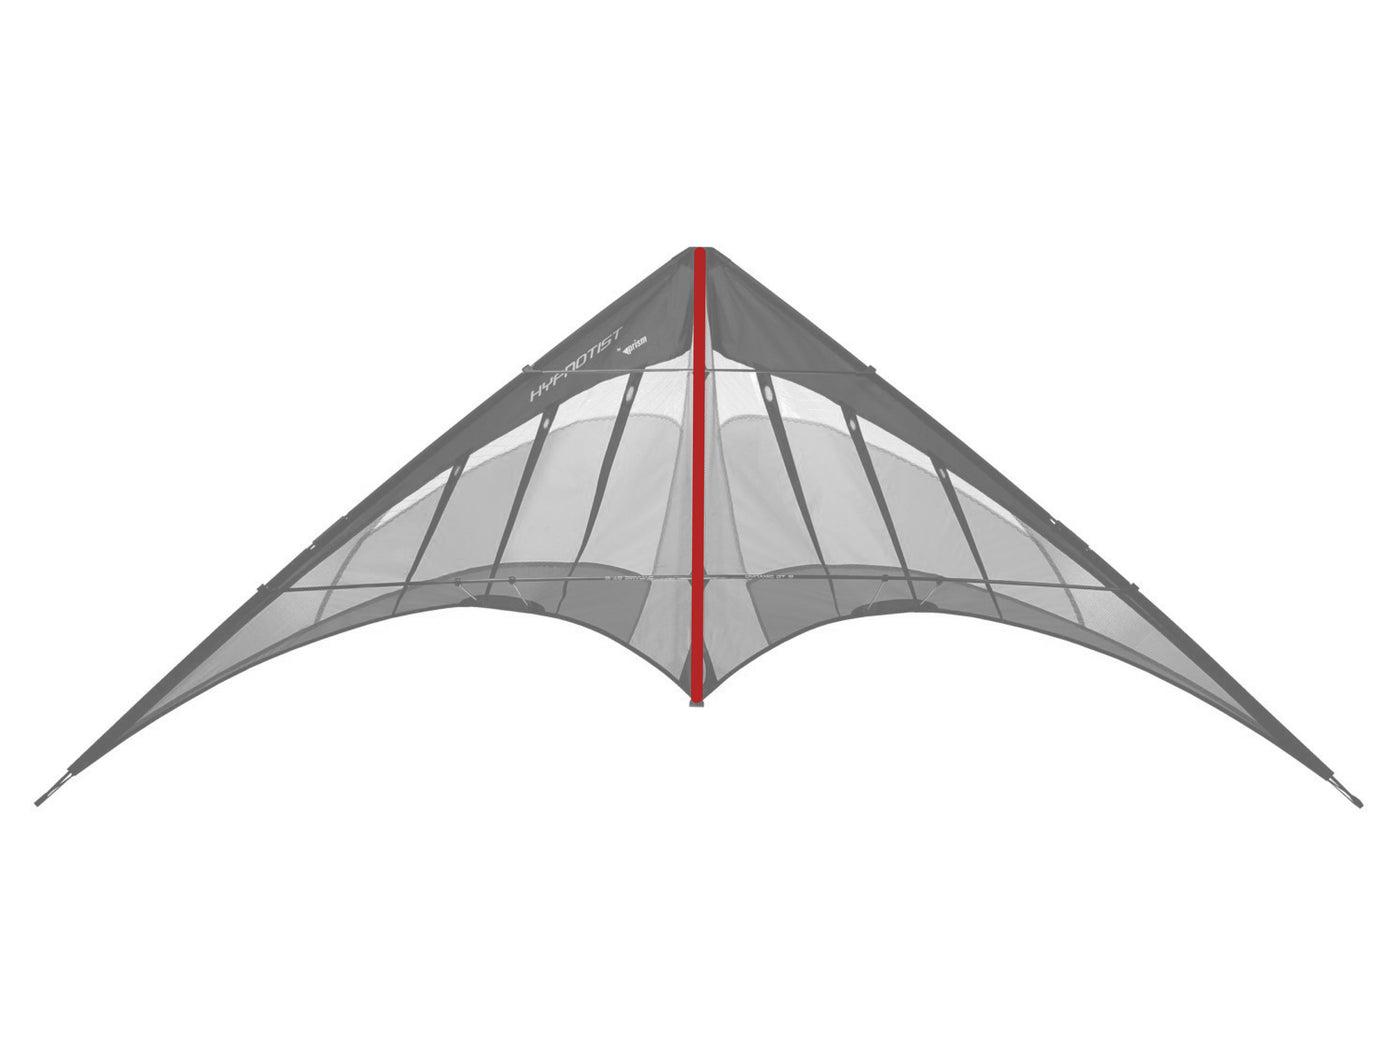 Diagram showing location of the Hypnotist Spine on the kite.